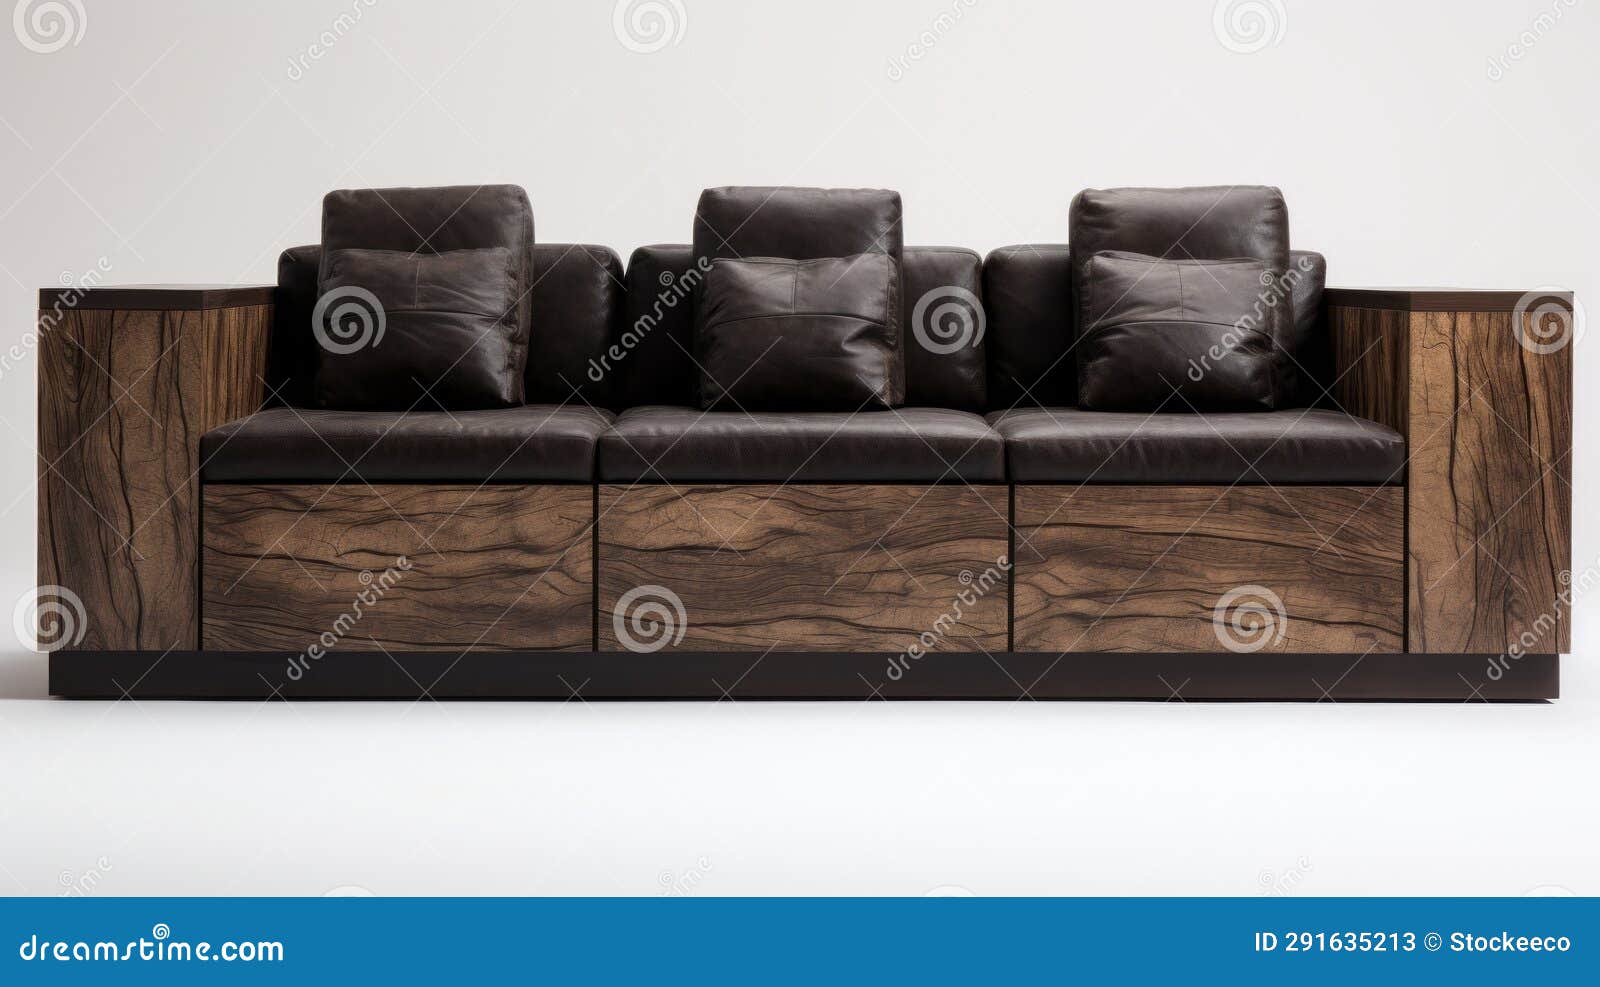 modern dark brown leather sofa with wood accents